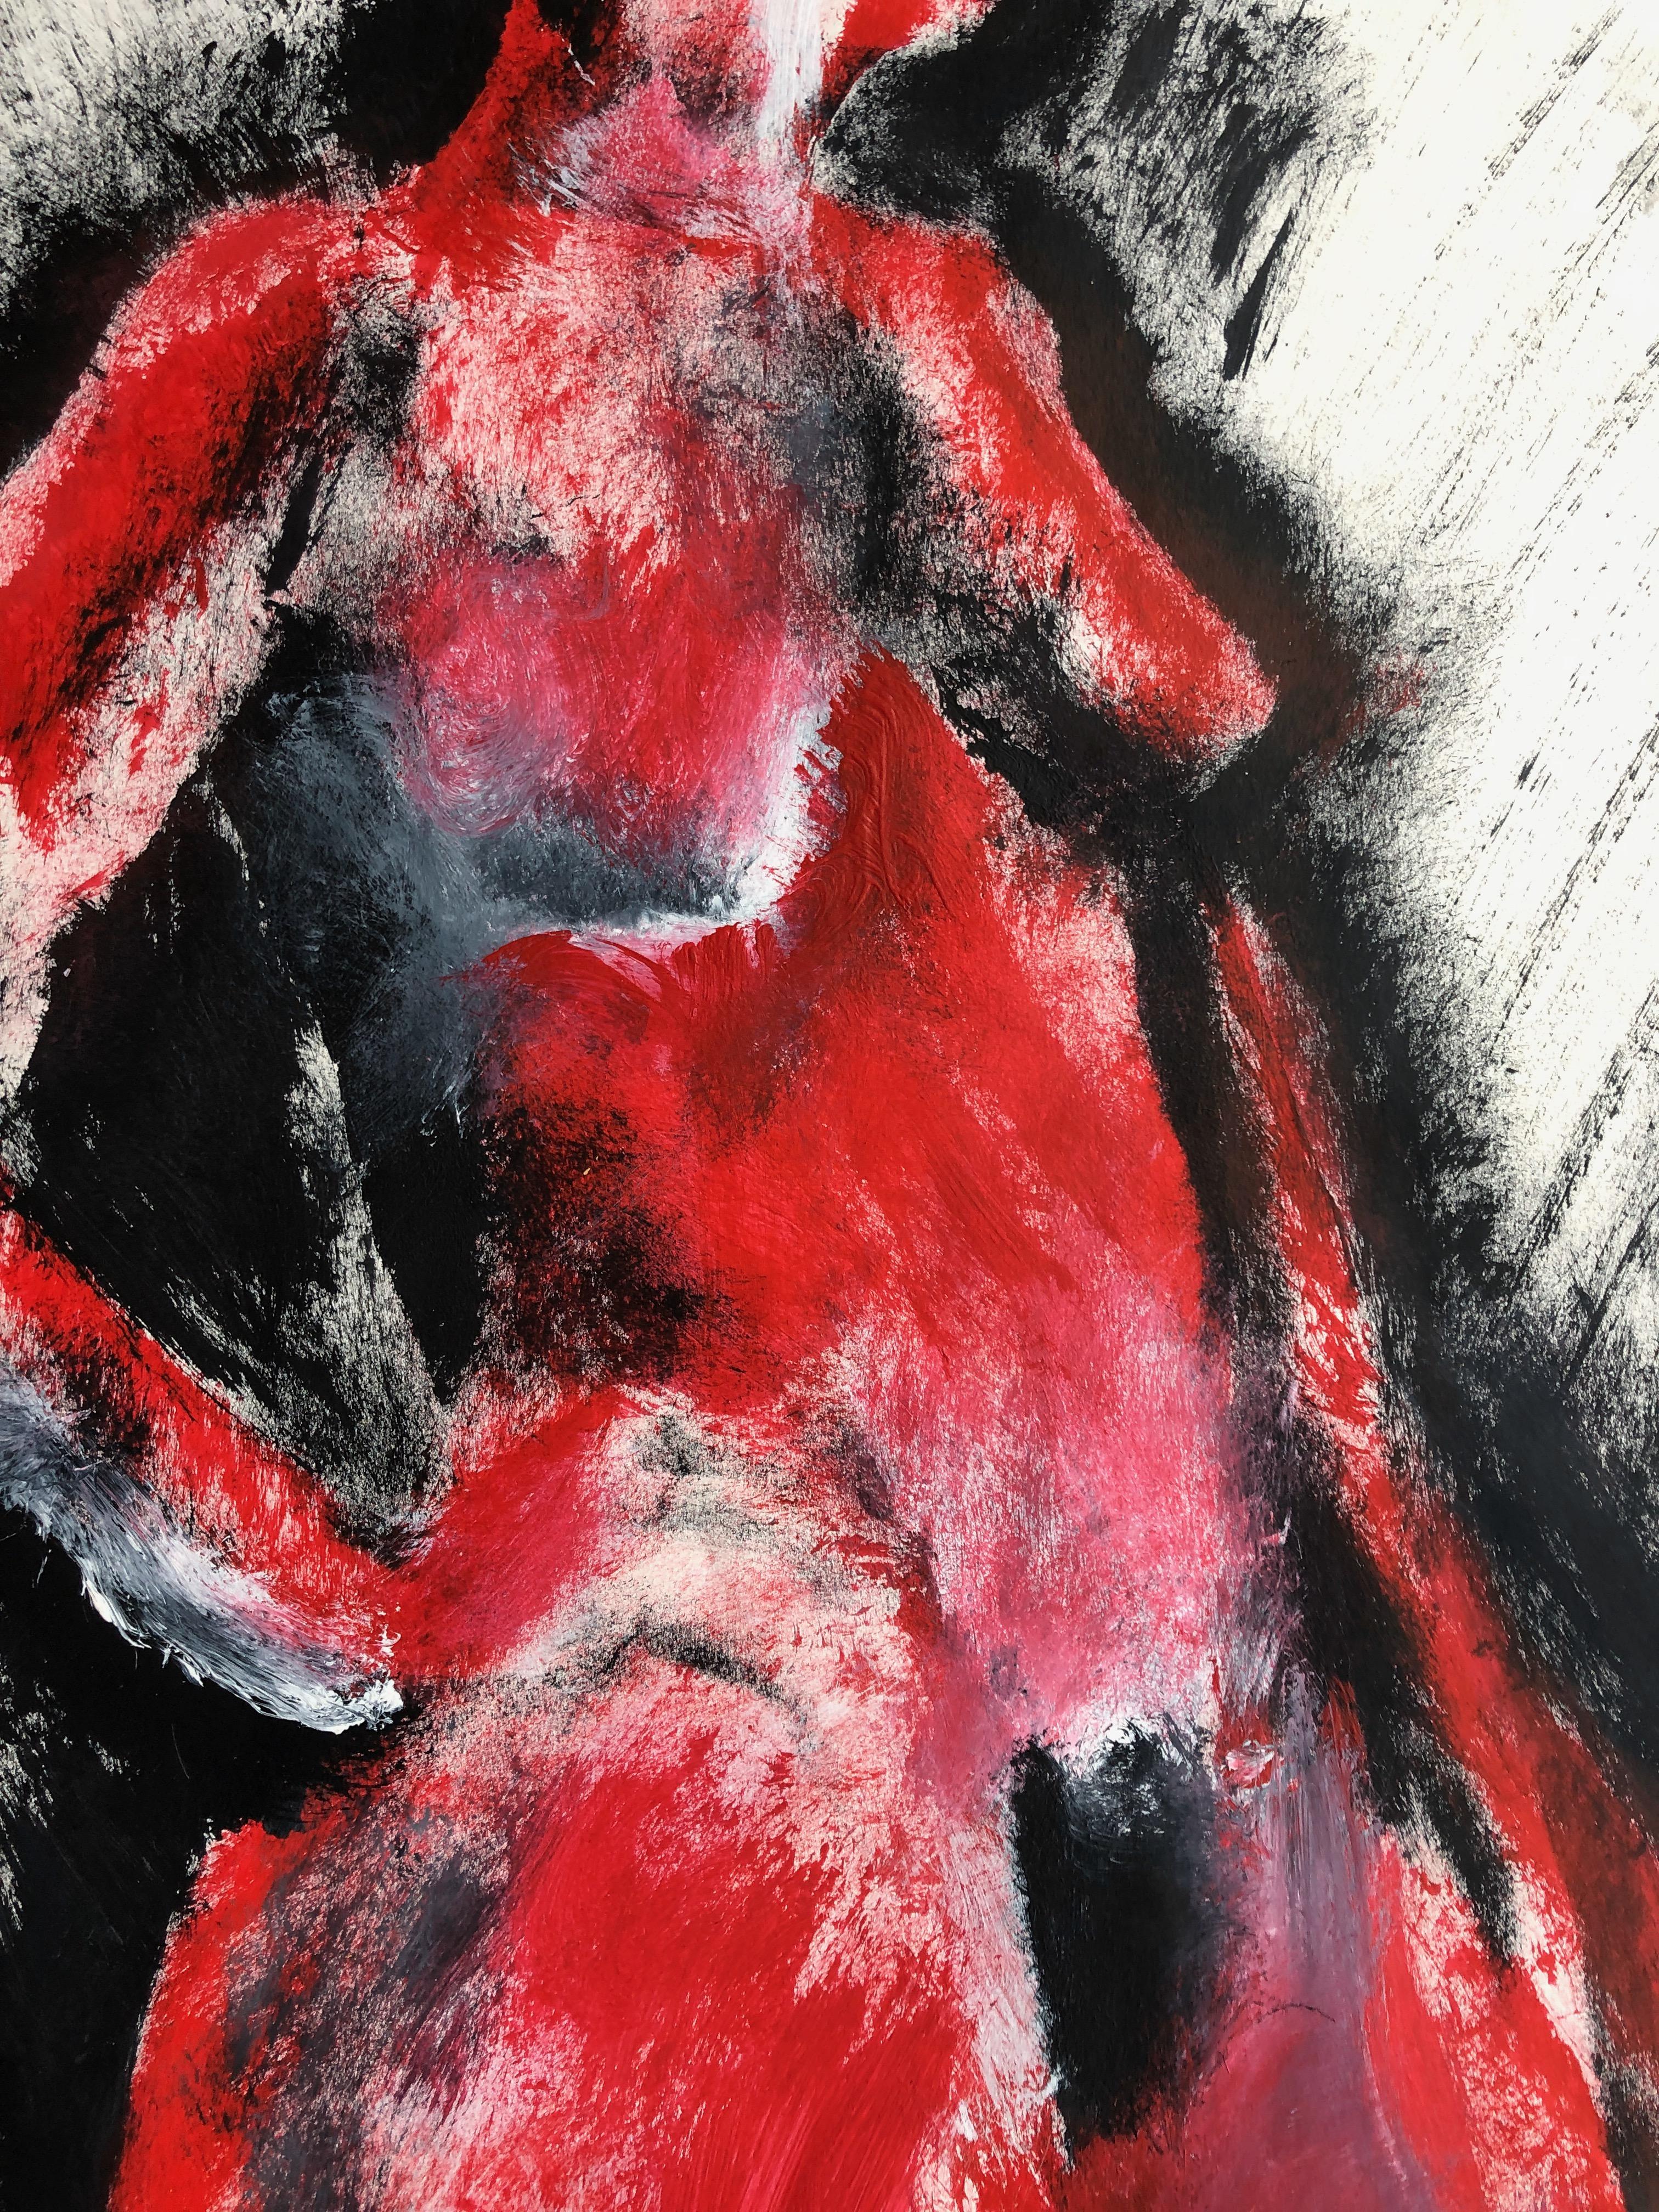 Lady In Red. Contemporary Mixed Media on paper - Art by Angela Lyle